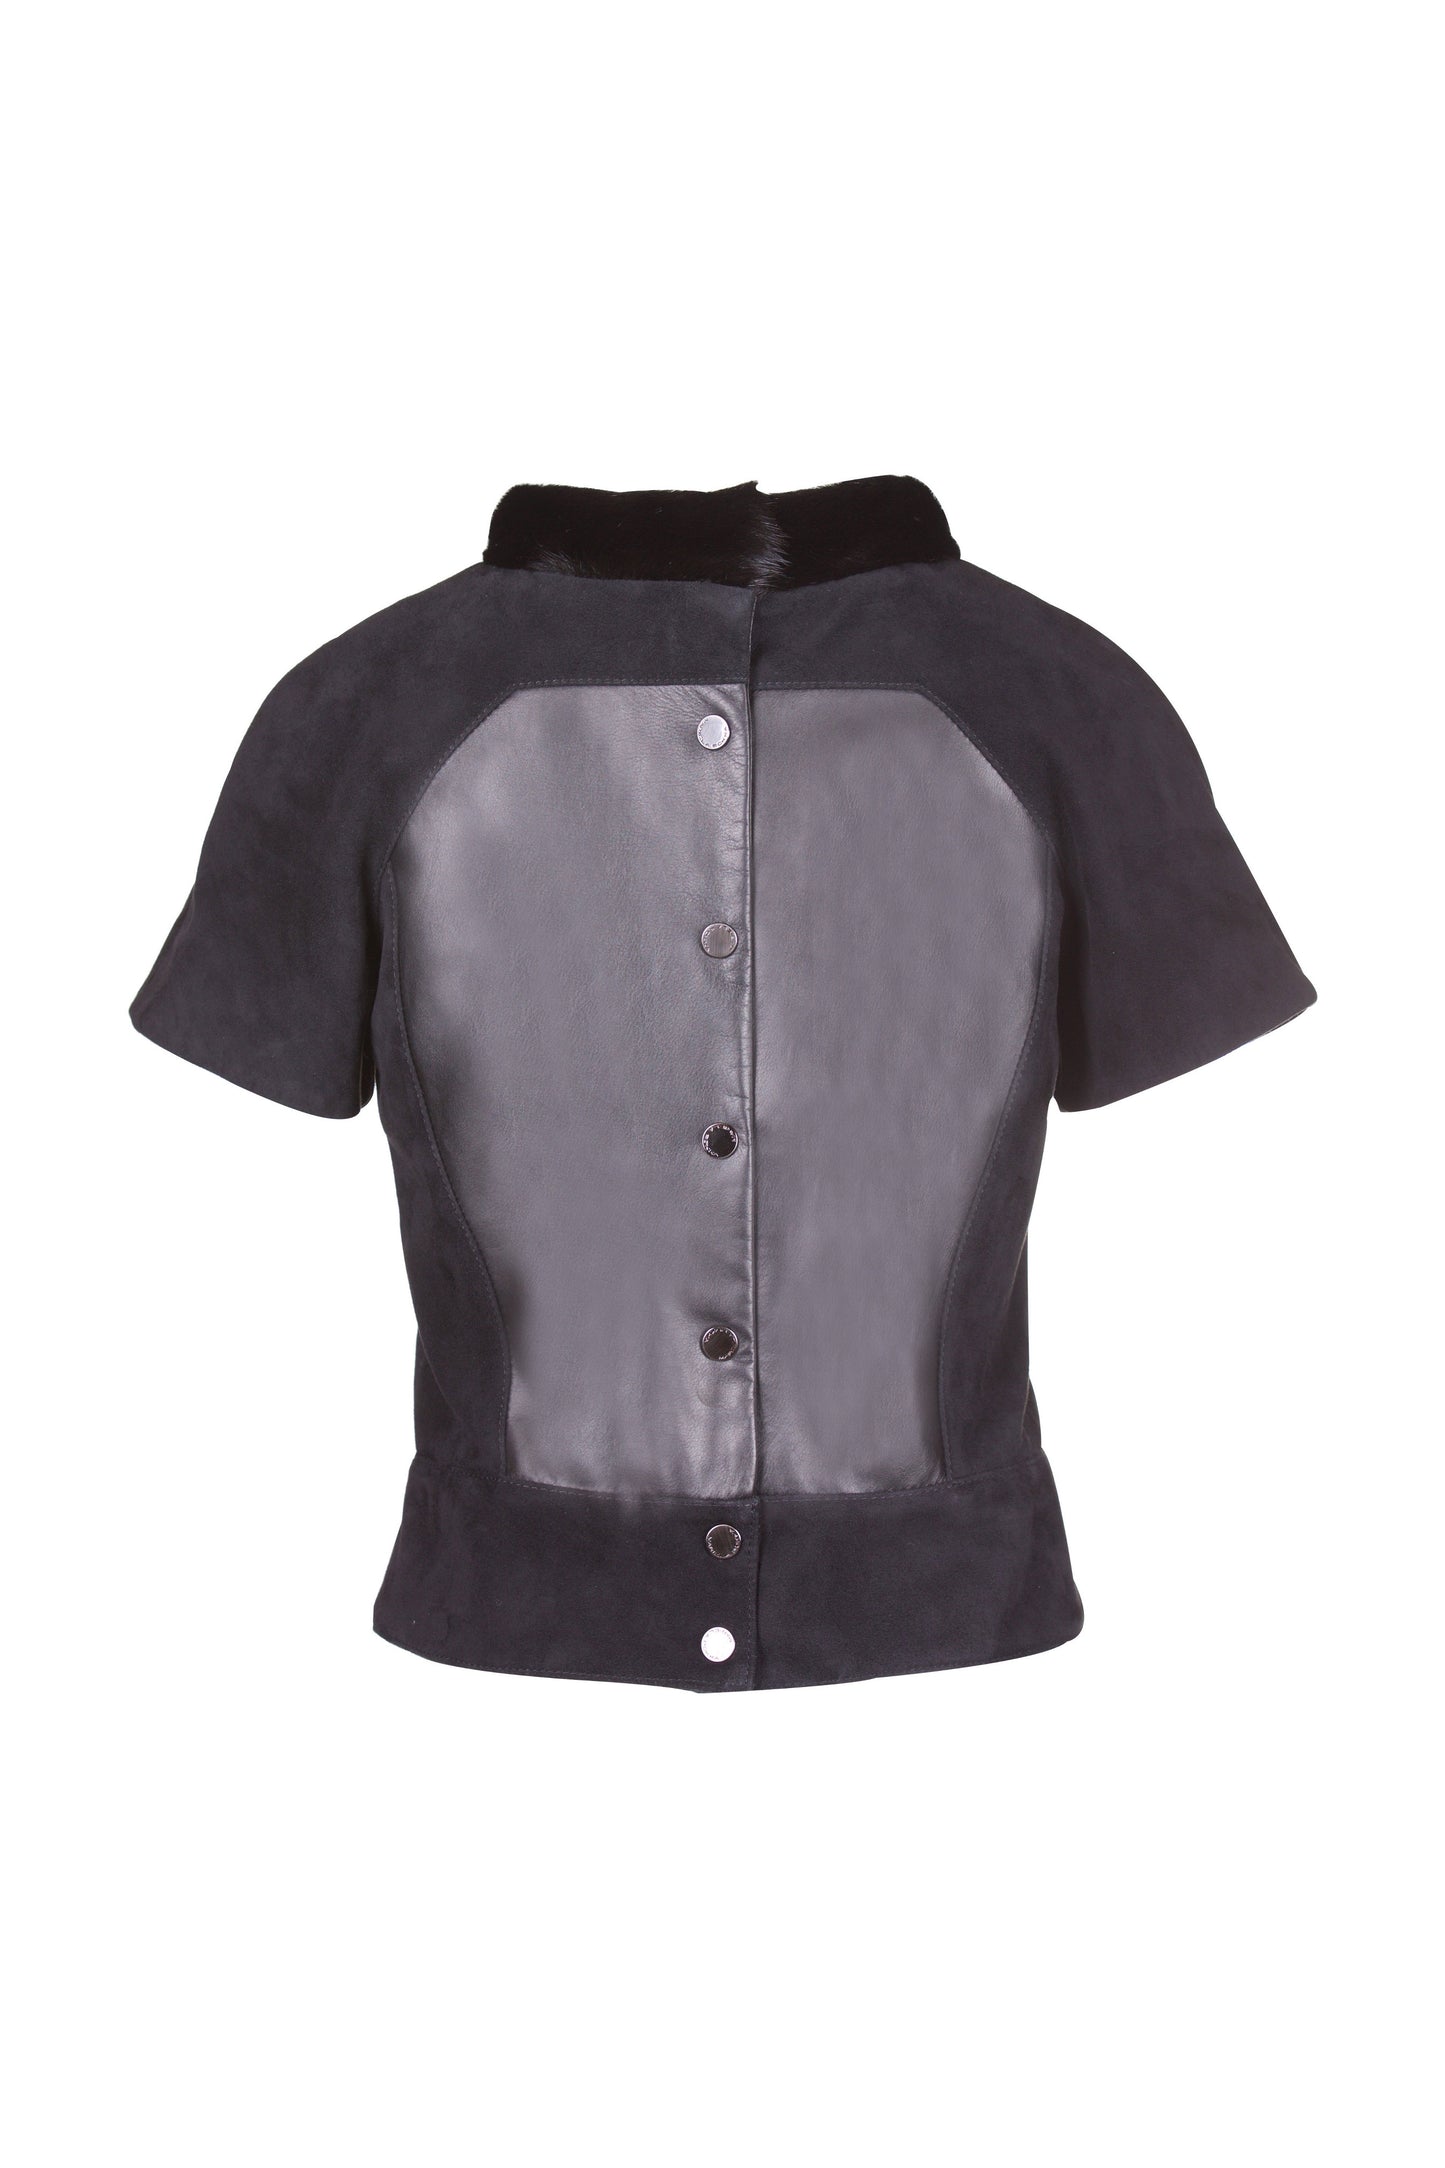 Suede Mink Reindeer Leather Blouse- Limited Edition